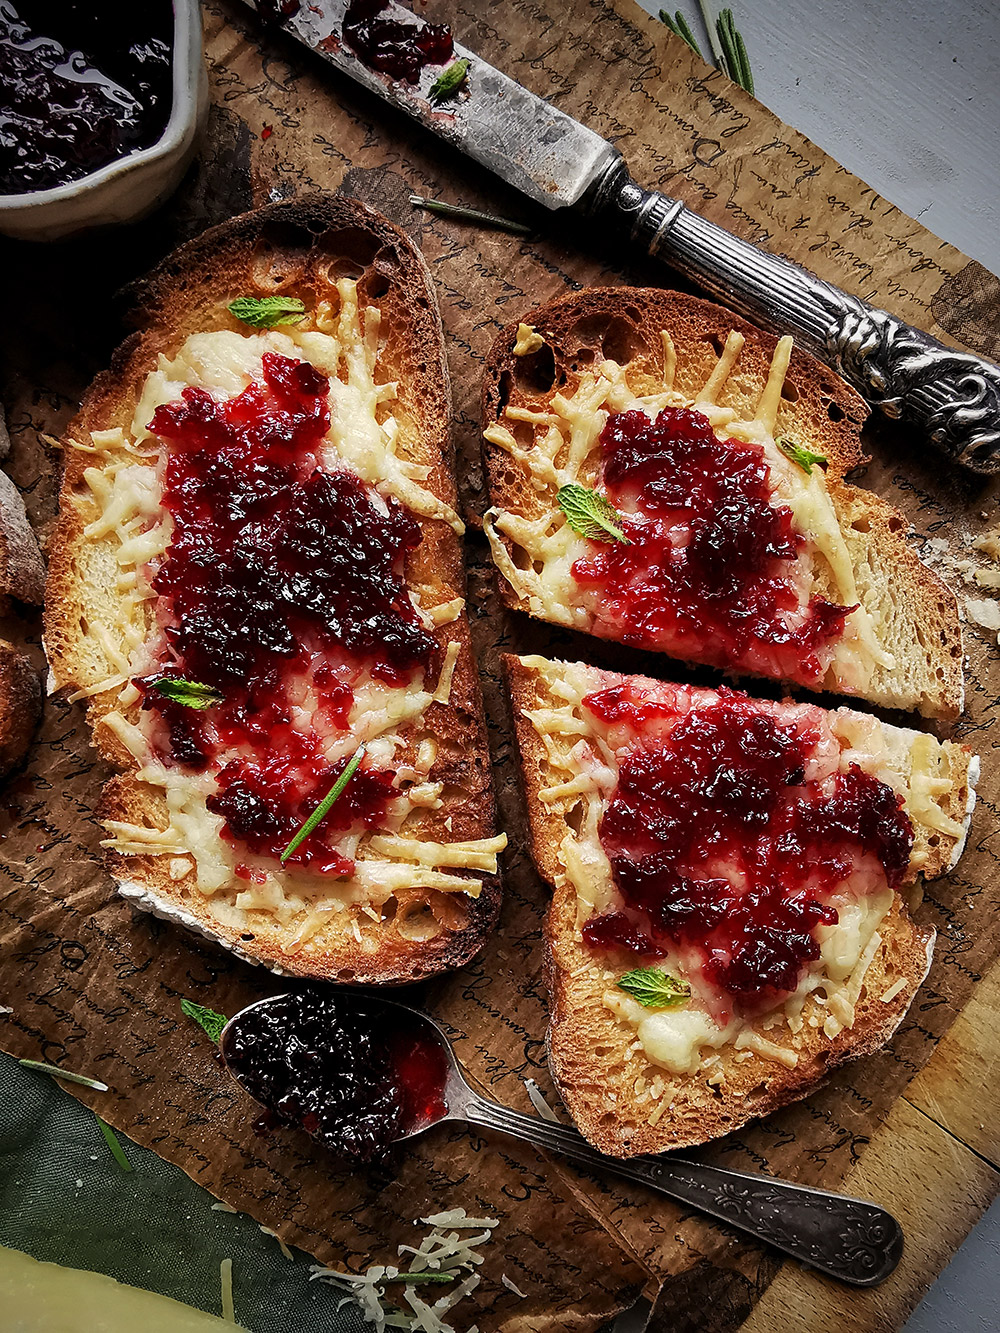 White aged cheddar and beetroot jam